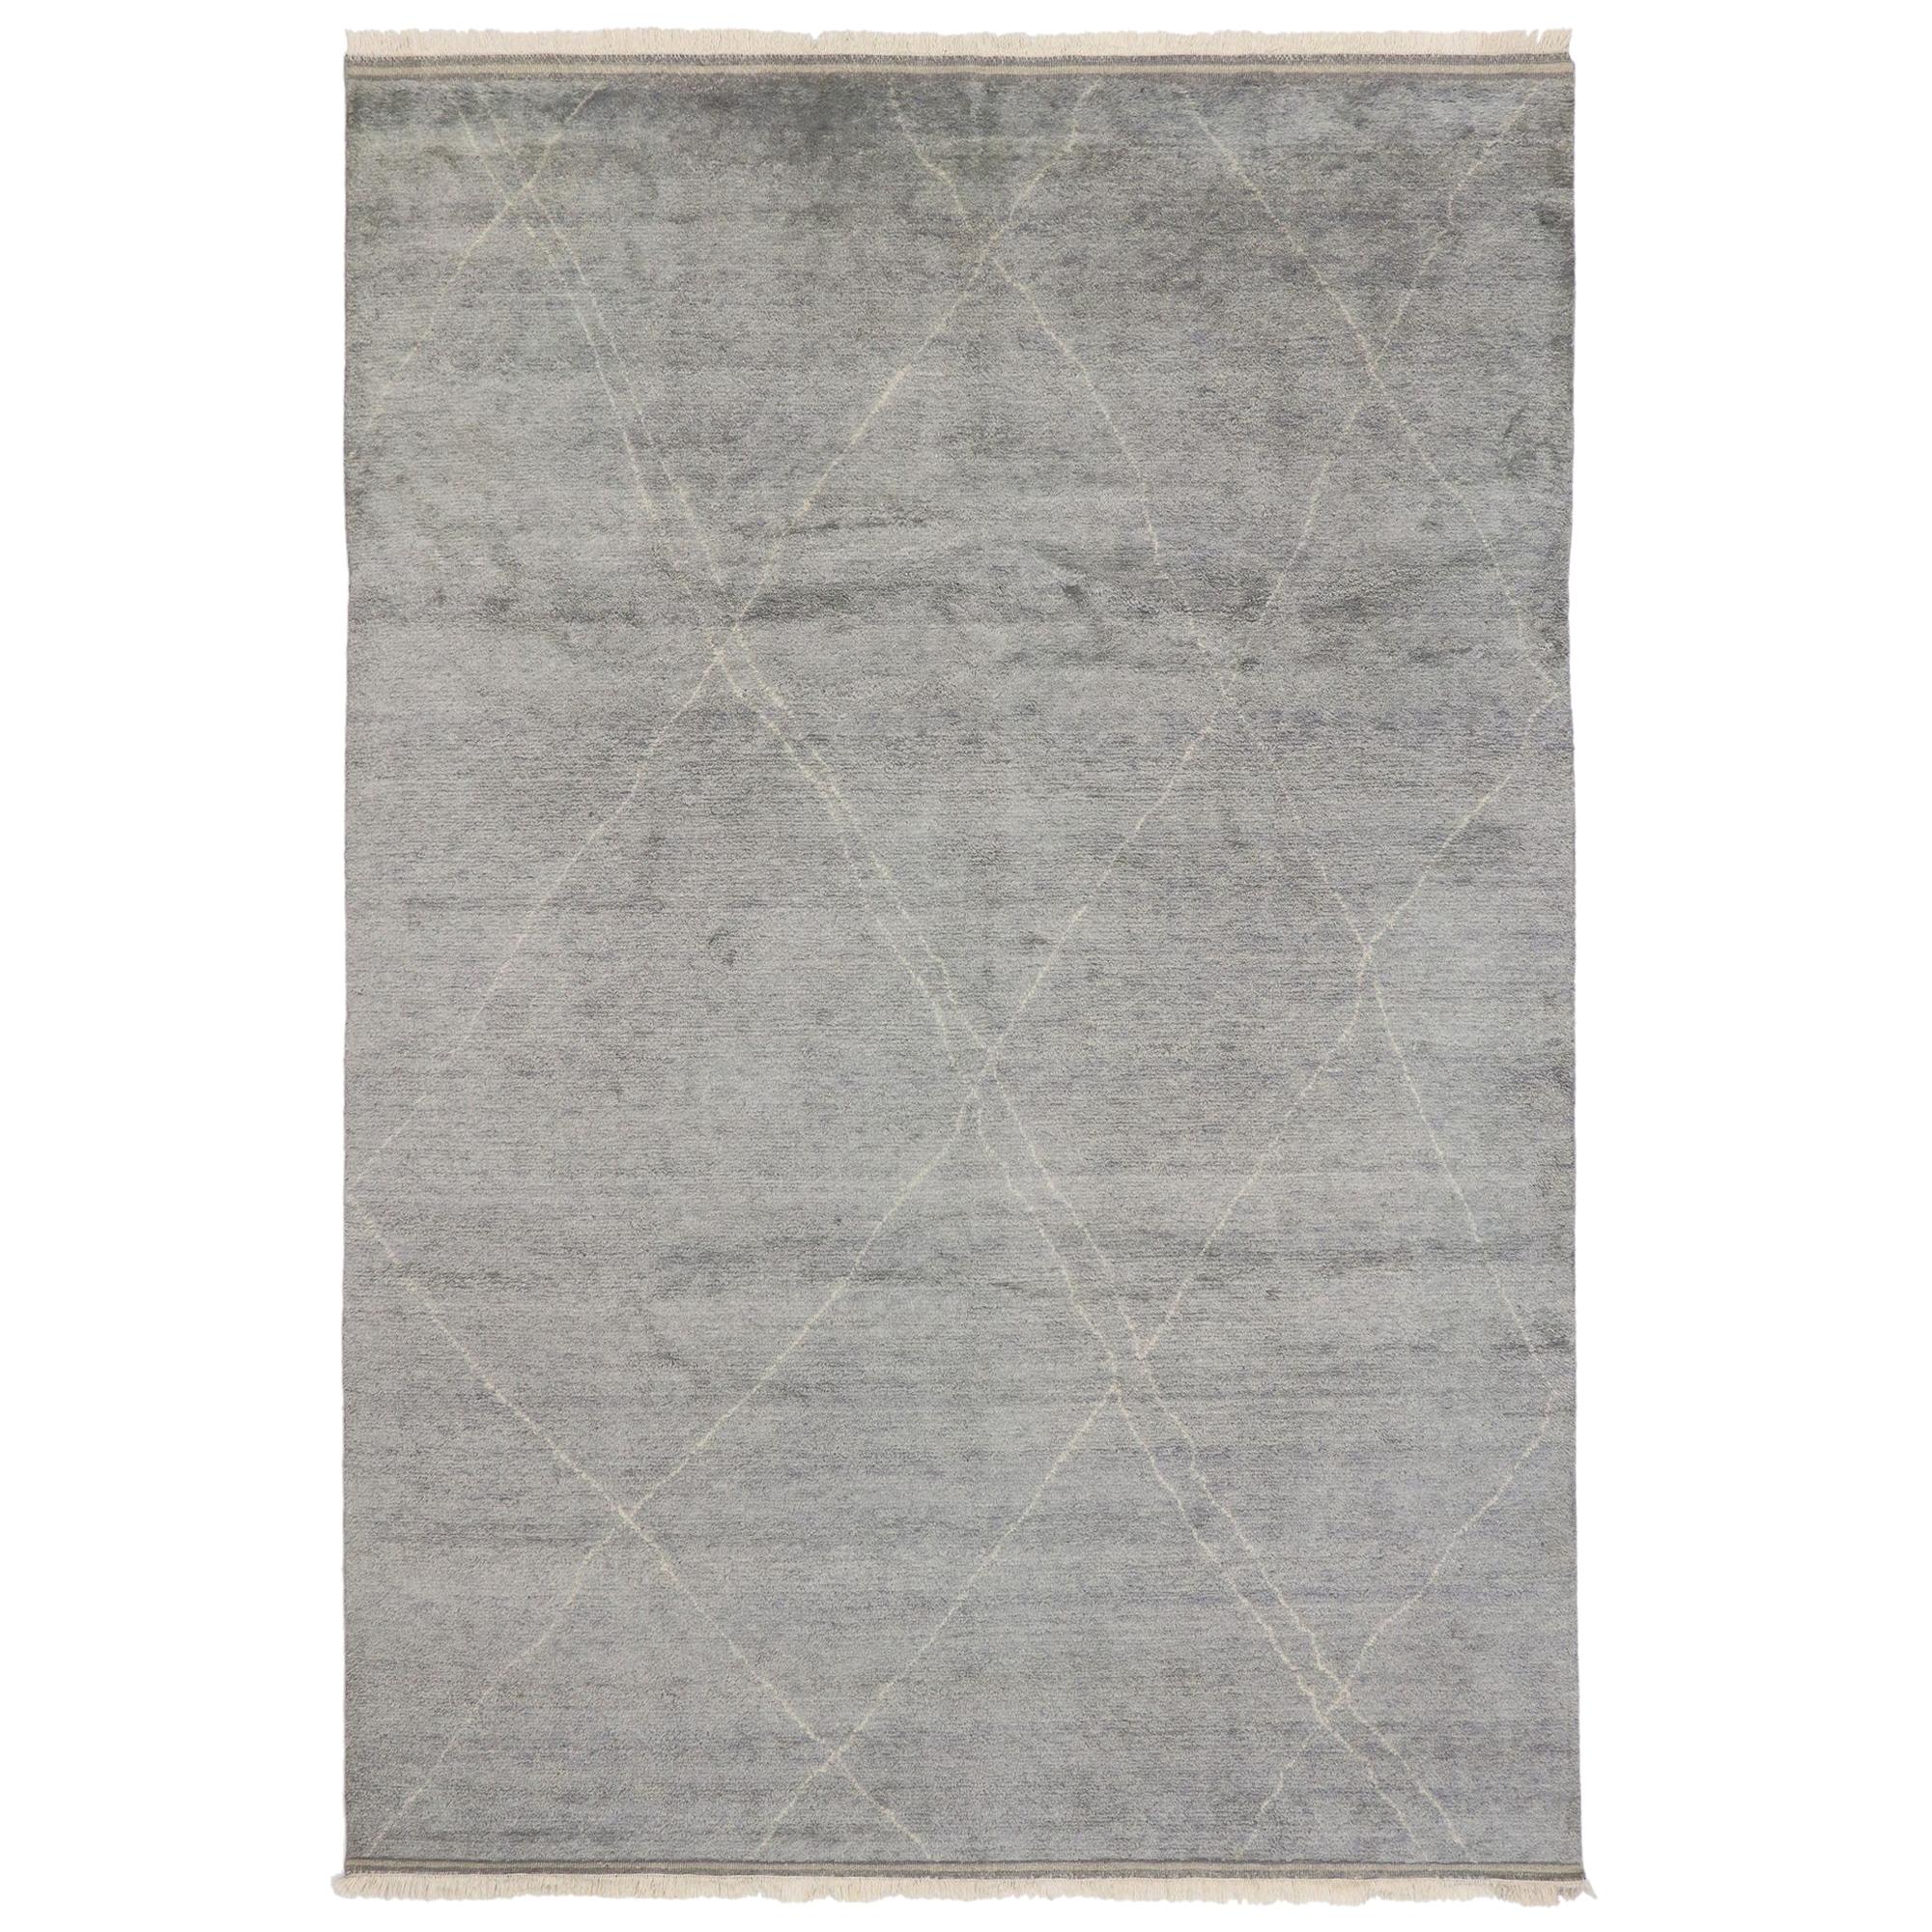 Contemporary Moroccan Style Rug with Danish Design